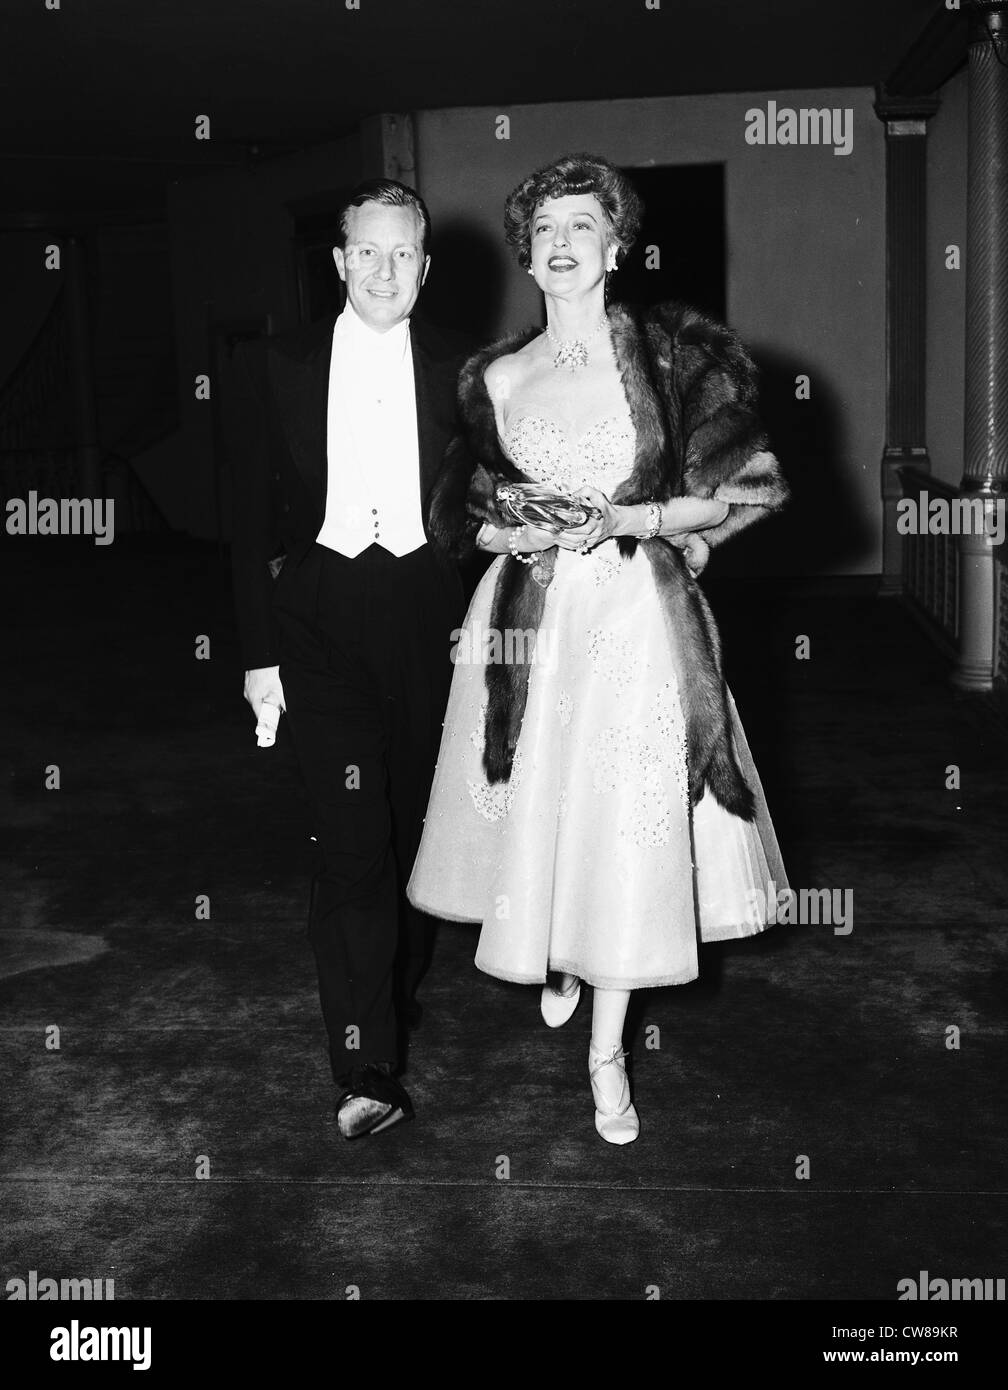 Singer and actress Jeanette MacDonald poses with her husband actor Gene ...